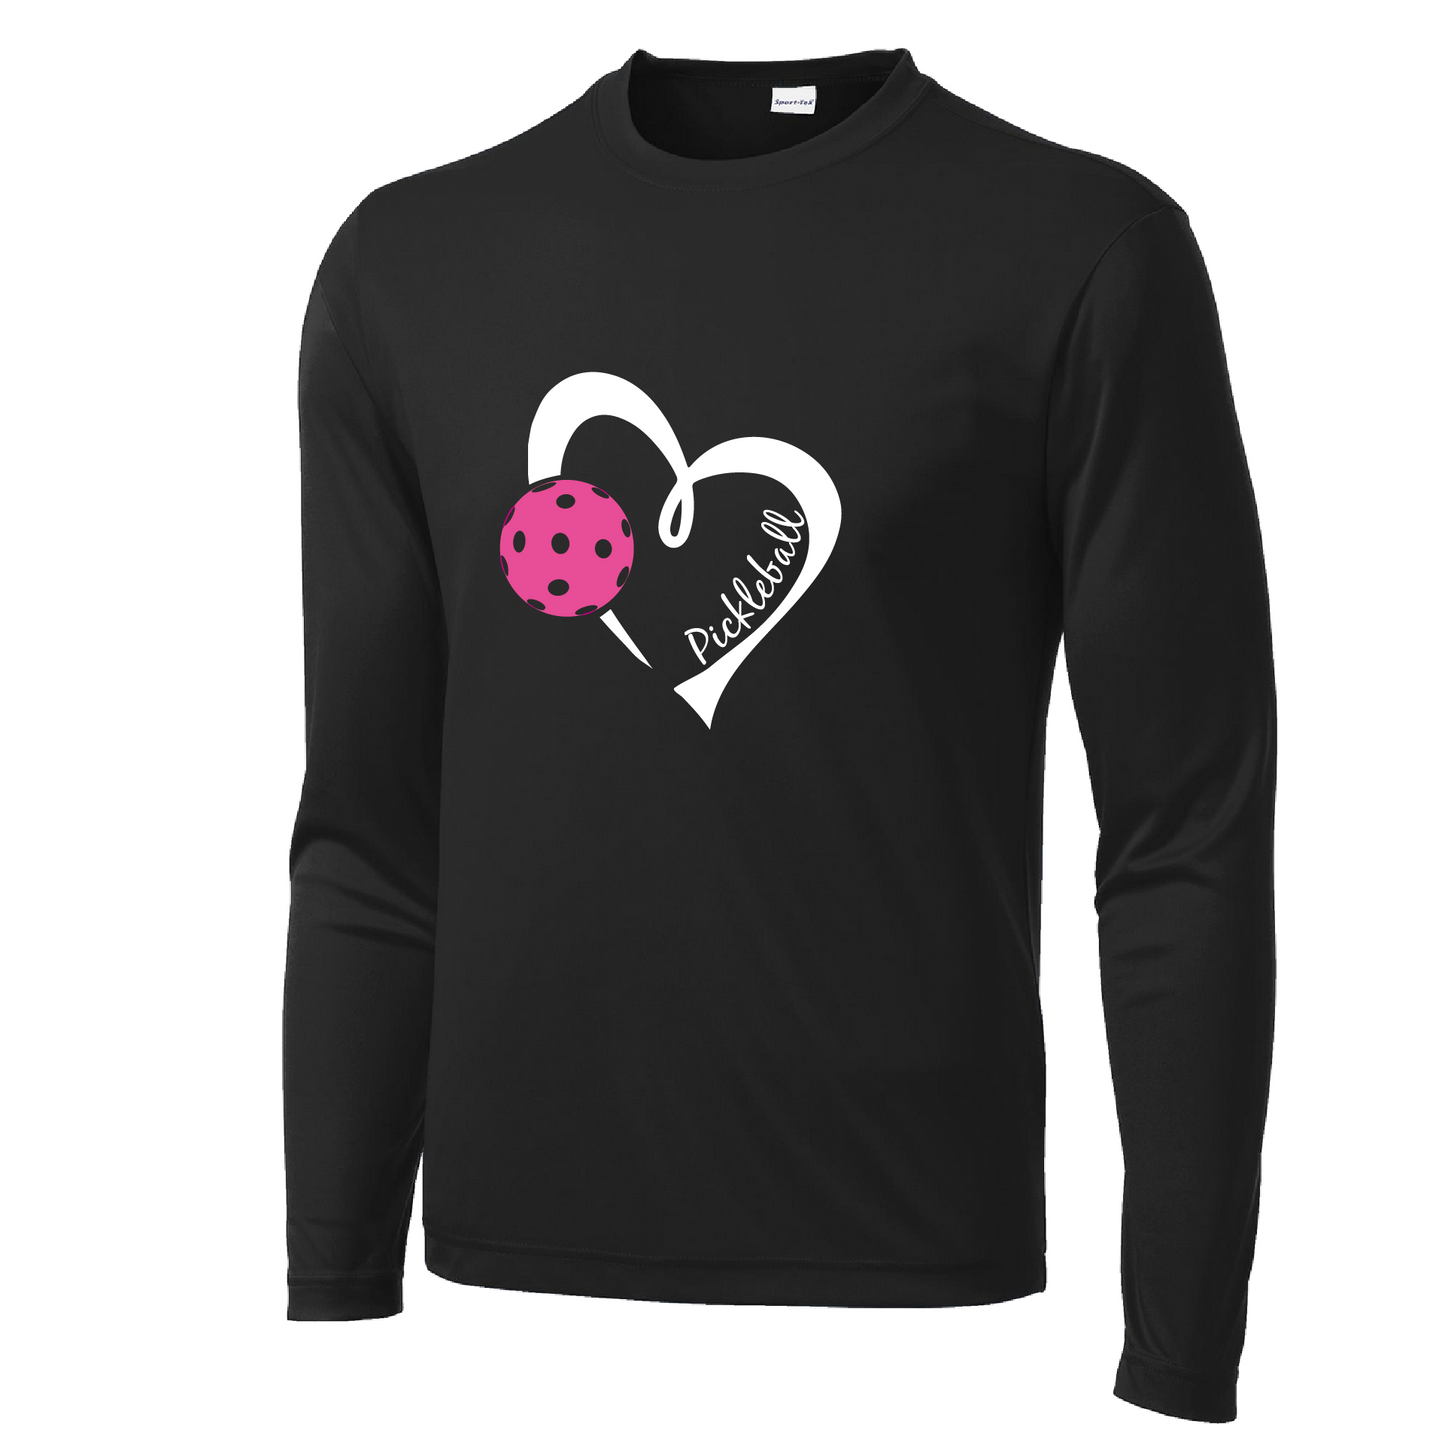 Pickleball Design: Heart with Pickleball  Men's Style: Long Sleeve  Shirts are lightweight, roomy and highly breathable. These moisture-wicking shirts are designed for athletic performance. They feature PosiCharge technology to lock in color and prevent logos from fading. Removable tag and set-in sleeves for comfort.